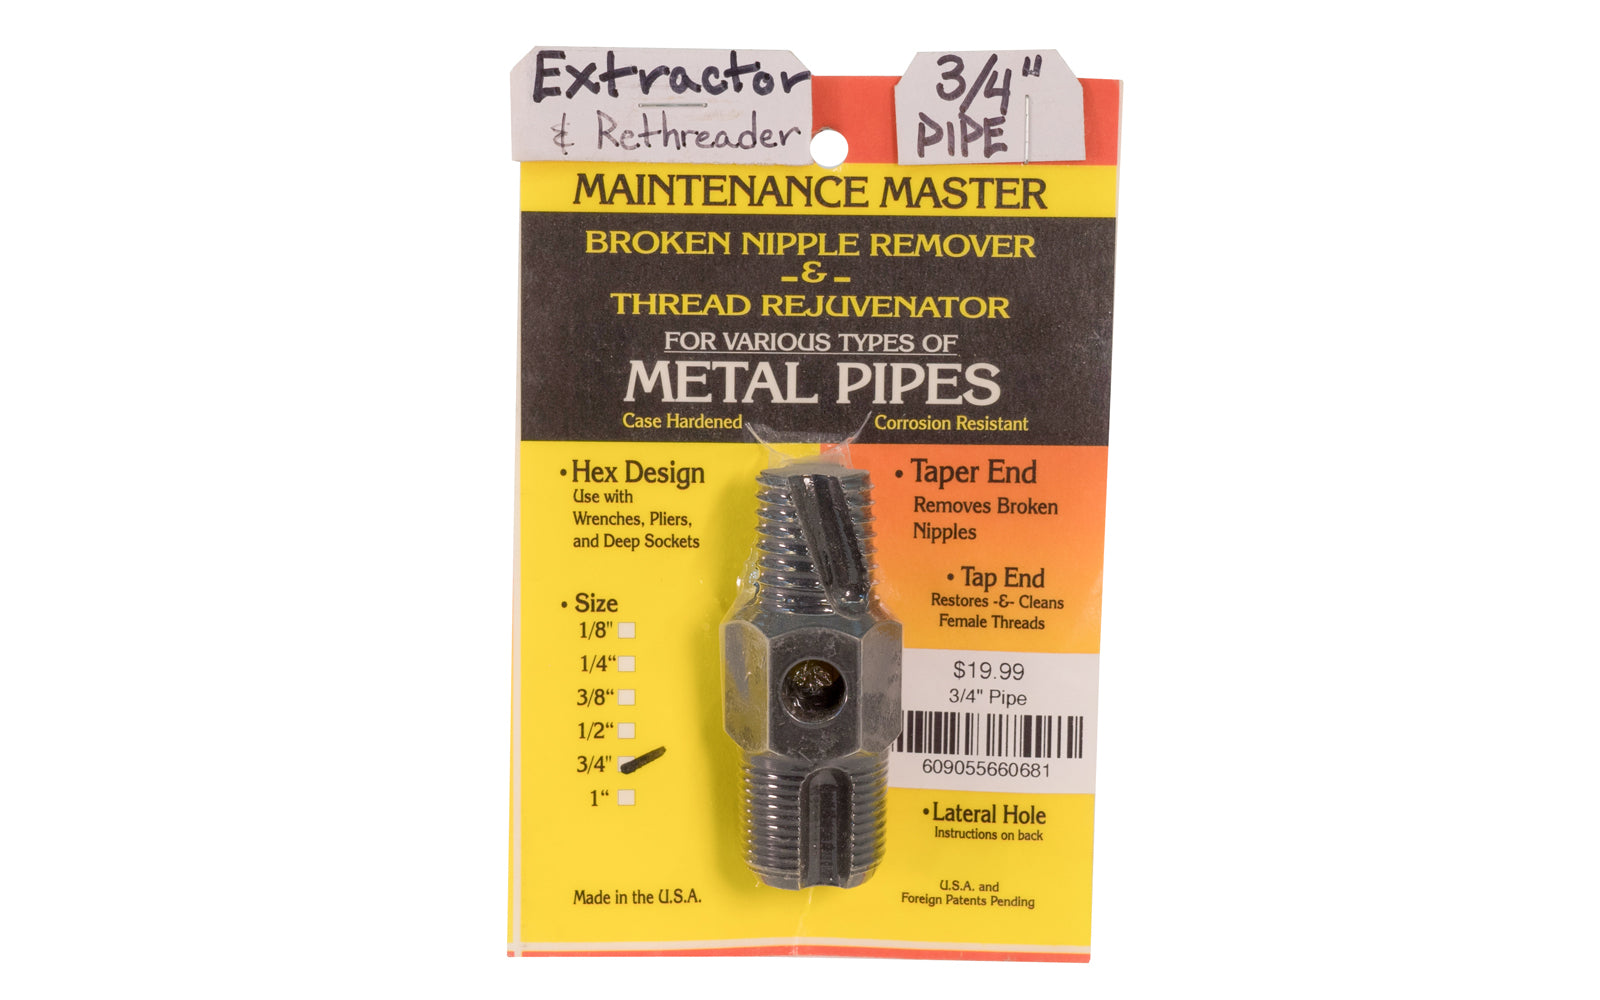 Broken Nipple Remover & Thread Rejuvenator - 3/4" Pipe. Hex design: Use with wrenches, pliers, & deep sockets. Taper End: Removes broken nipples. Tap End:  Restores & cleans female threads.   Made in USA.